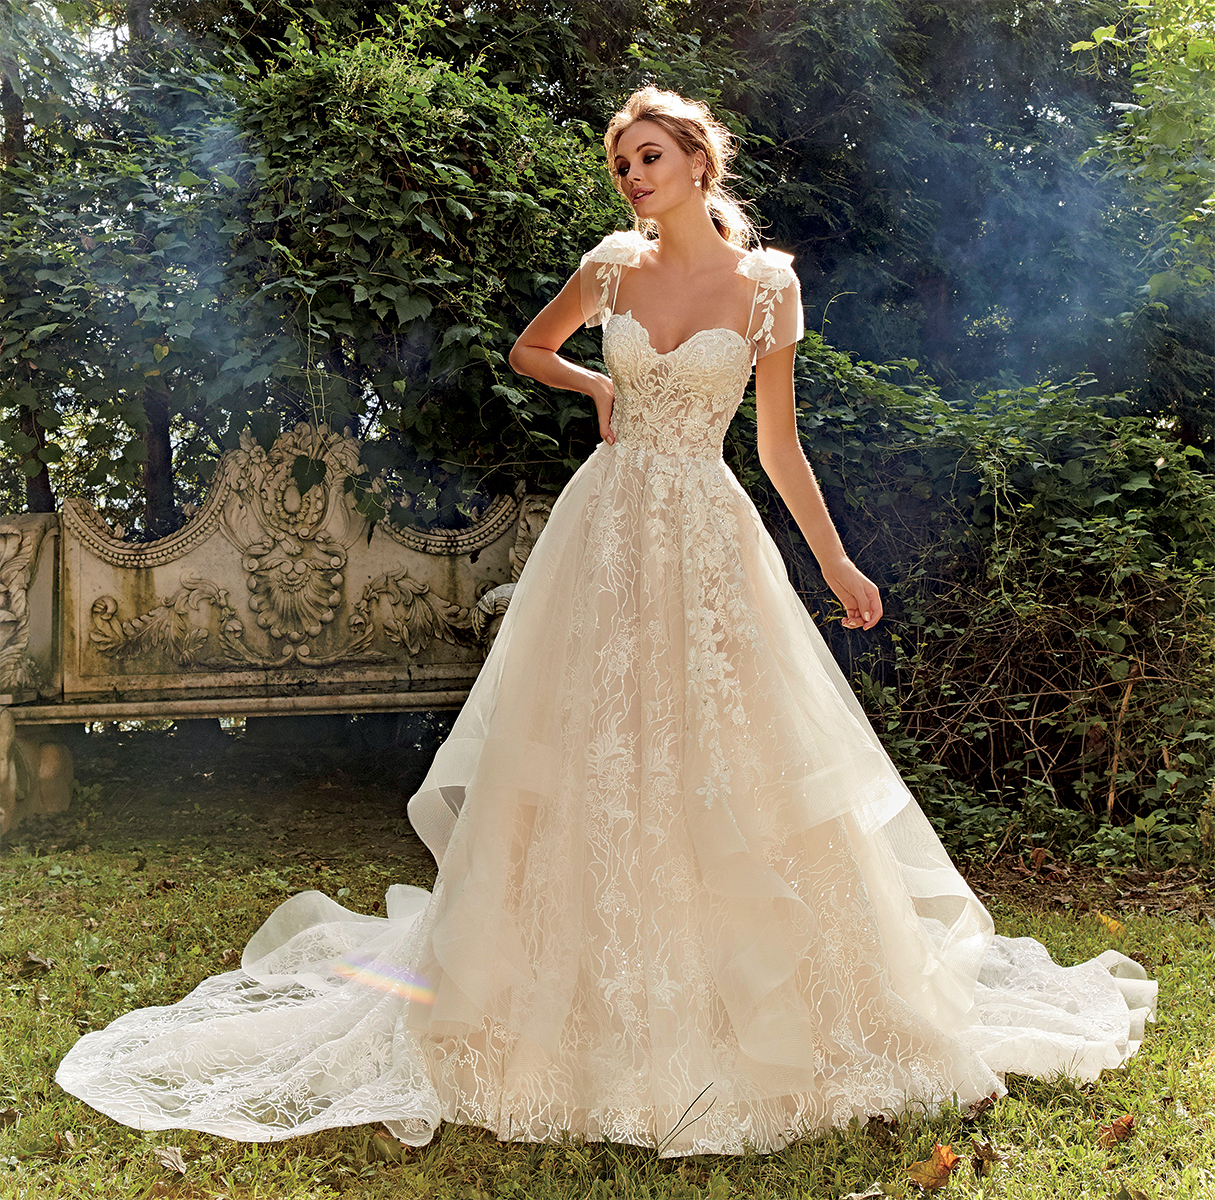 Buy typical wedding dress price cheap online